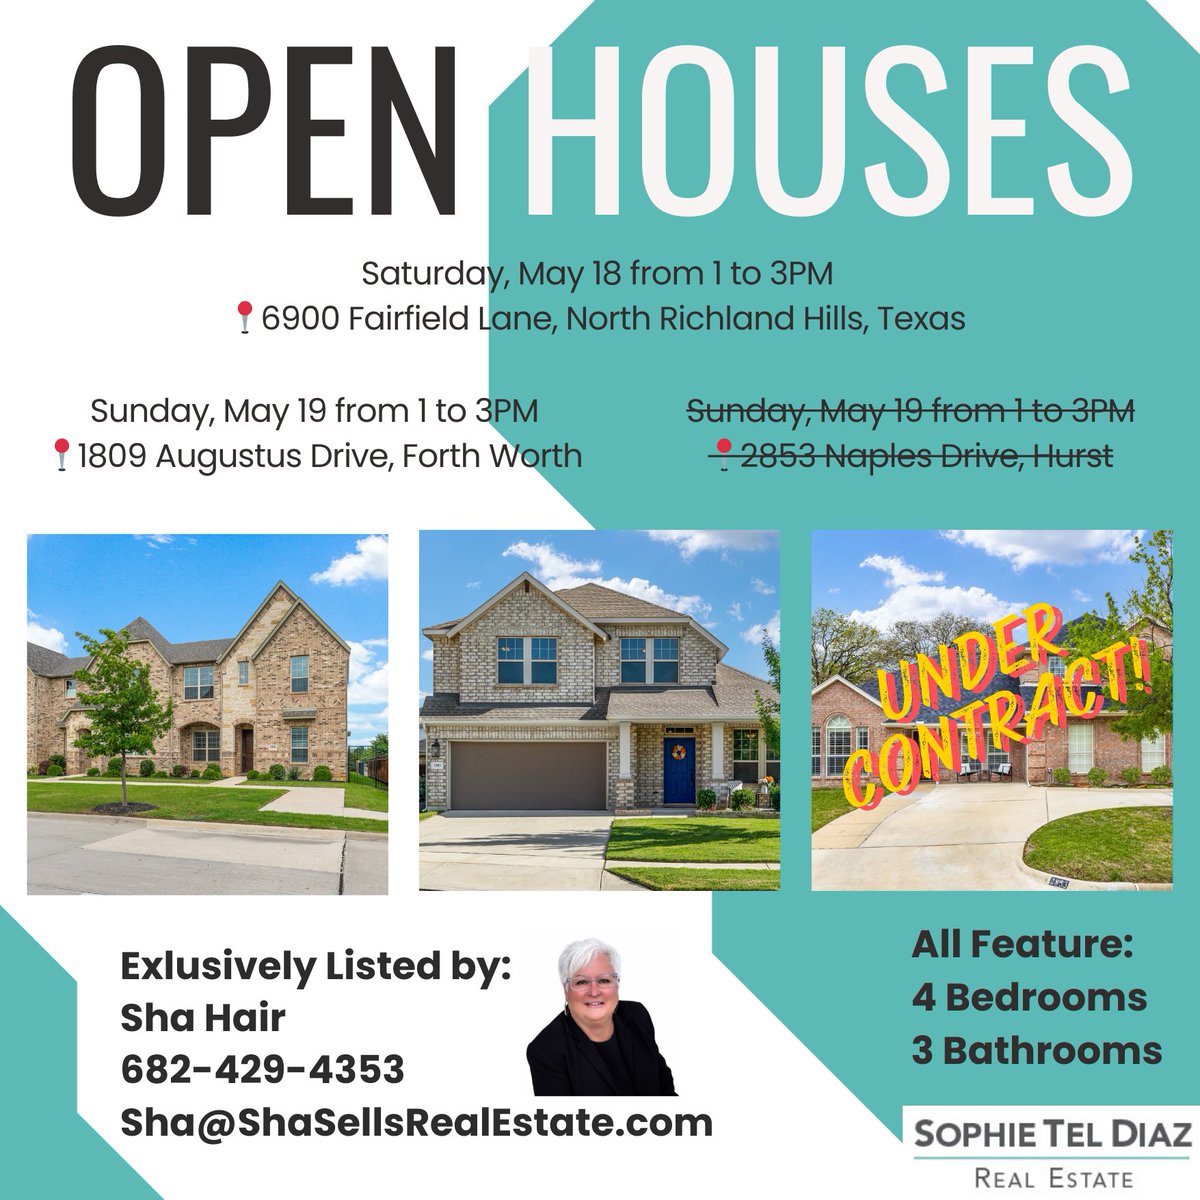 THIS WEEKEND!
Saturday, May 18 from 1 to 3PM
📍6900 Fairfield Lane, North Richland Hills
Sunday, May 19 from 1 to 3PM
📍1809 Augustus Drive, Forth Worth
📲Call or Text Sha at 682-429-4353
#openhouse #openhouses #dfwrealestate #texasrealestate #shahairrealtor #shasellsrealestate